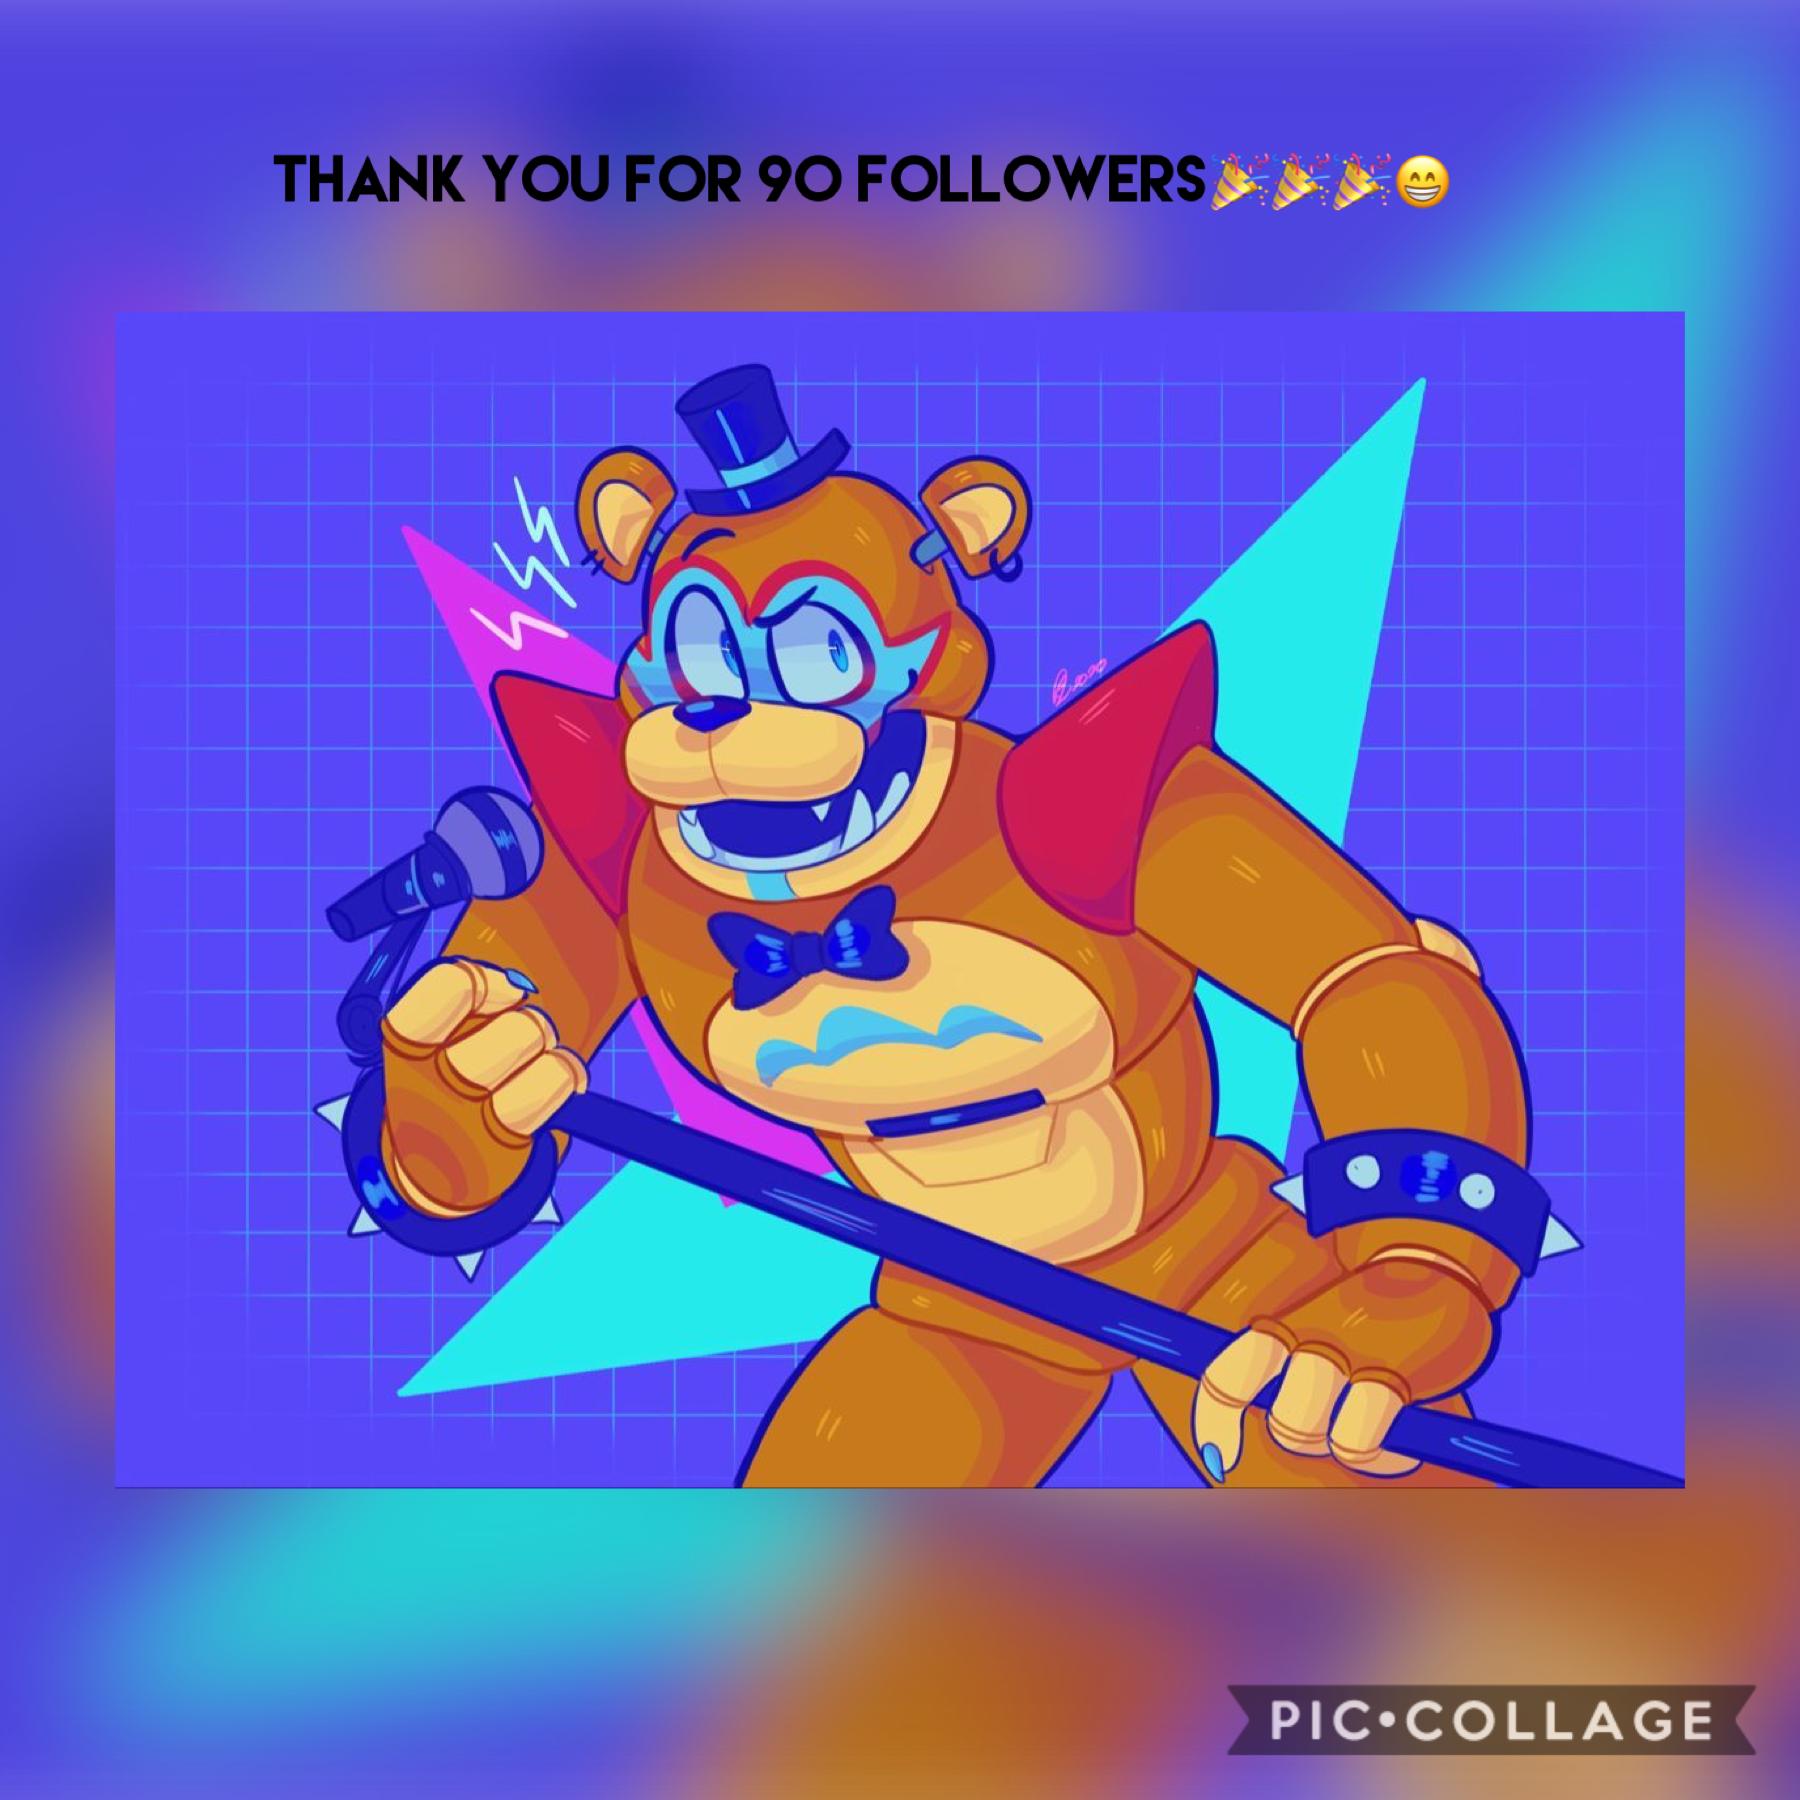 Thank you for 90 followers🎉🎉🎉😎